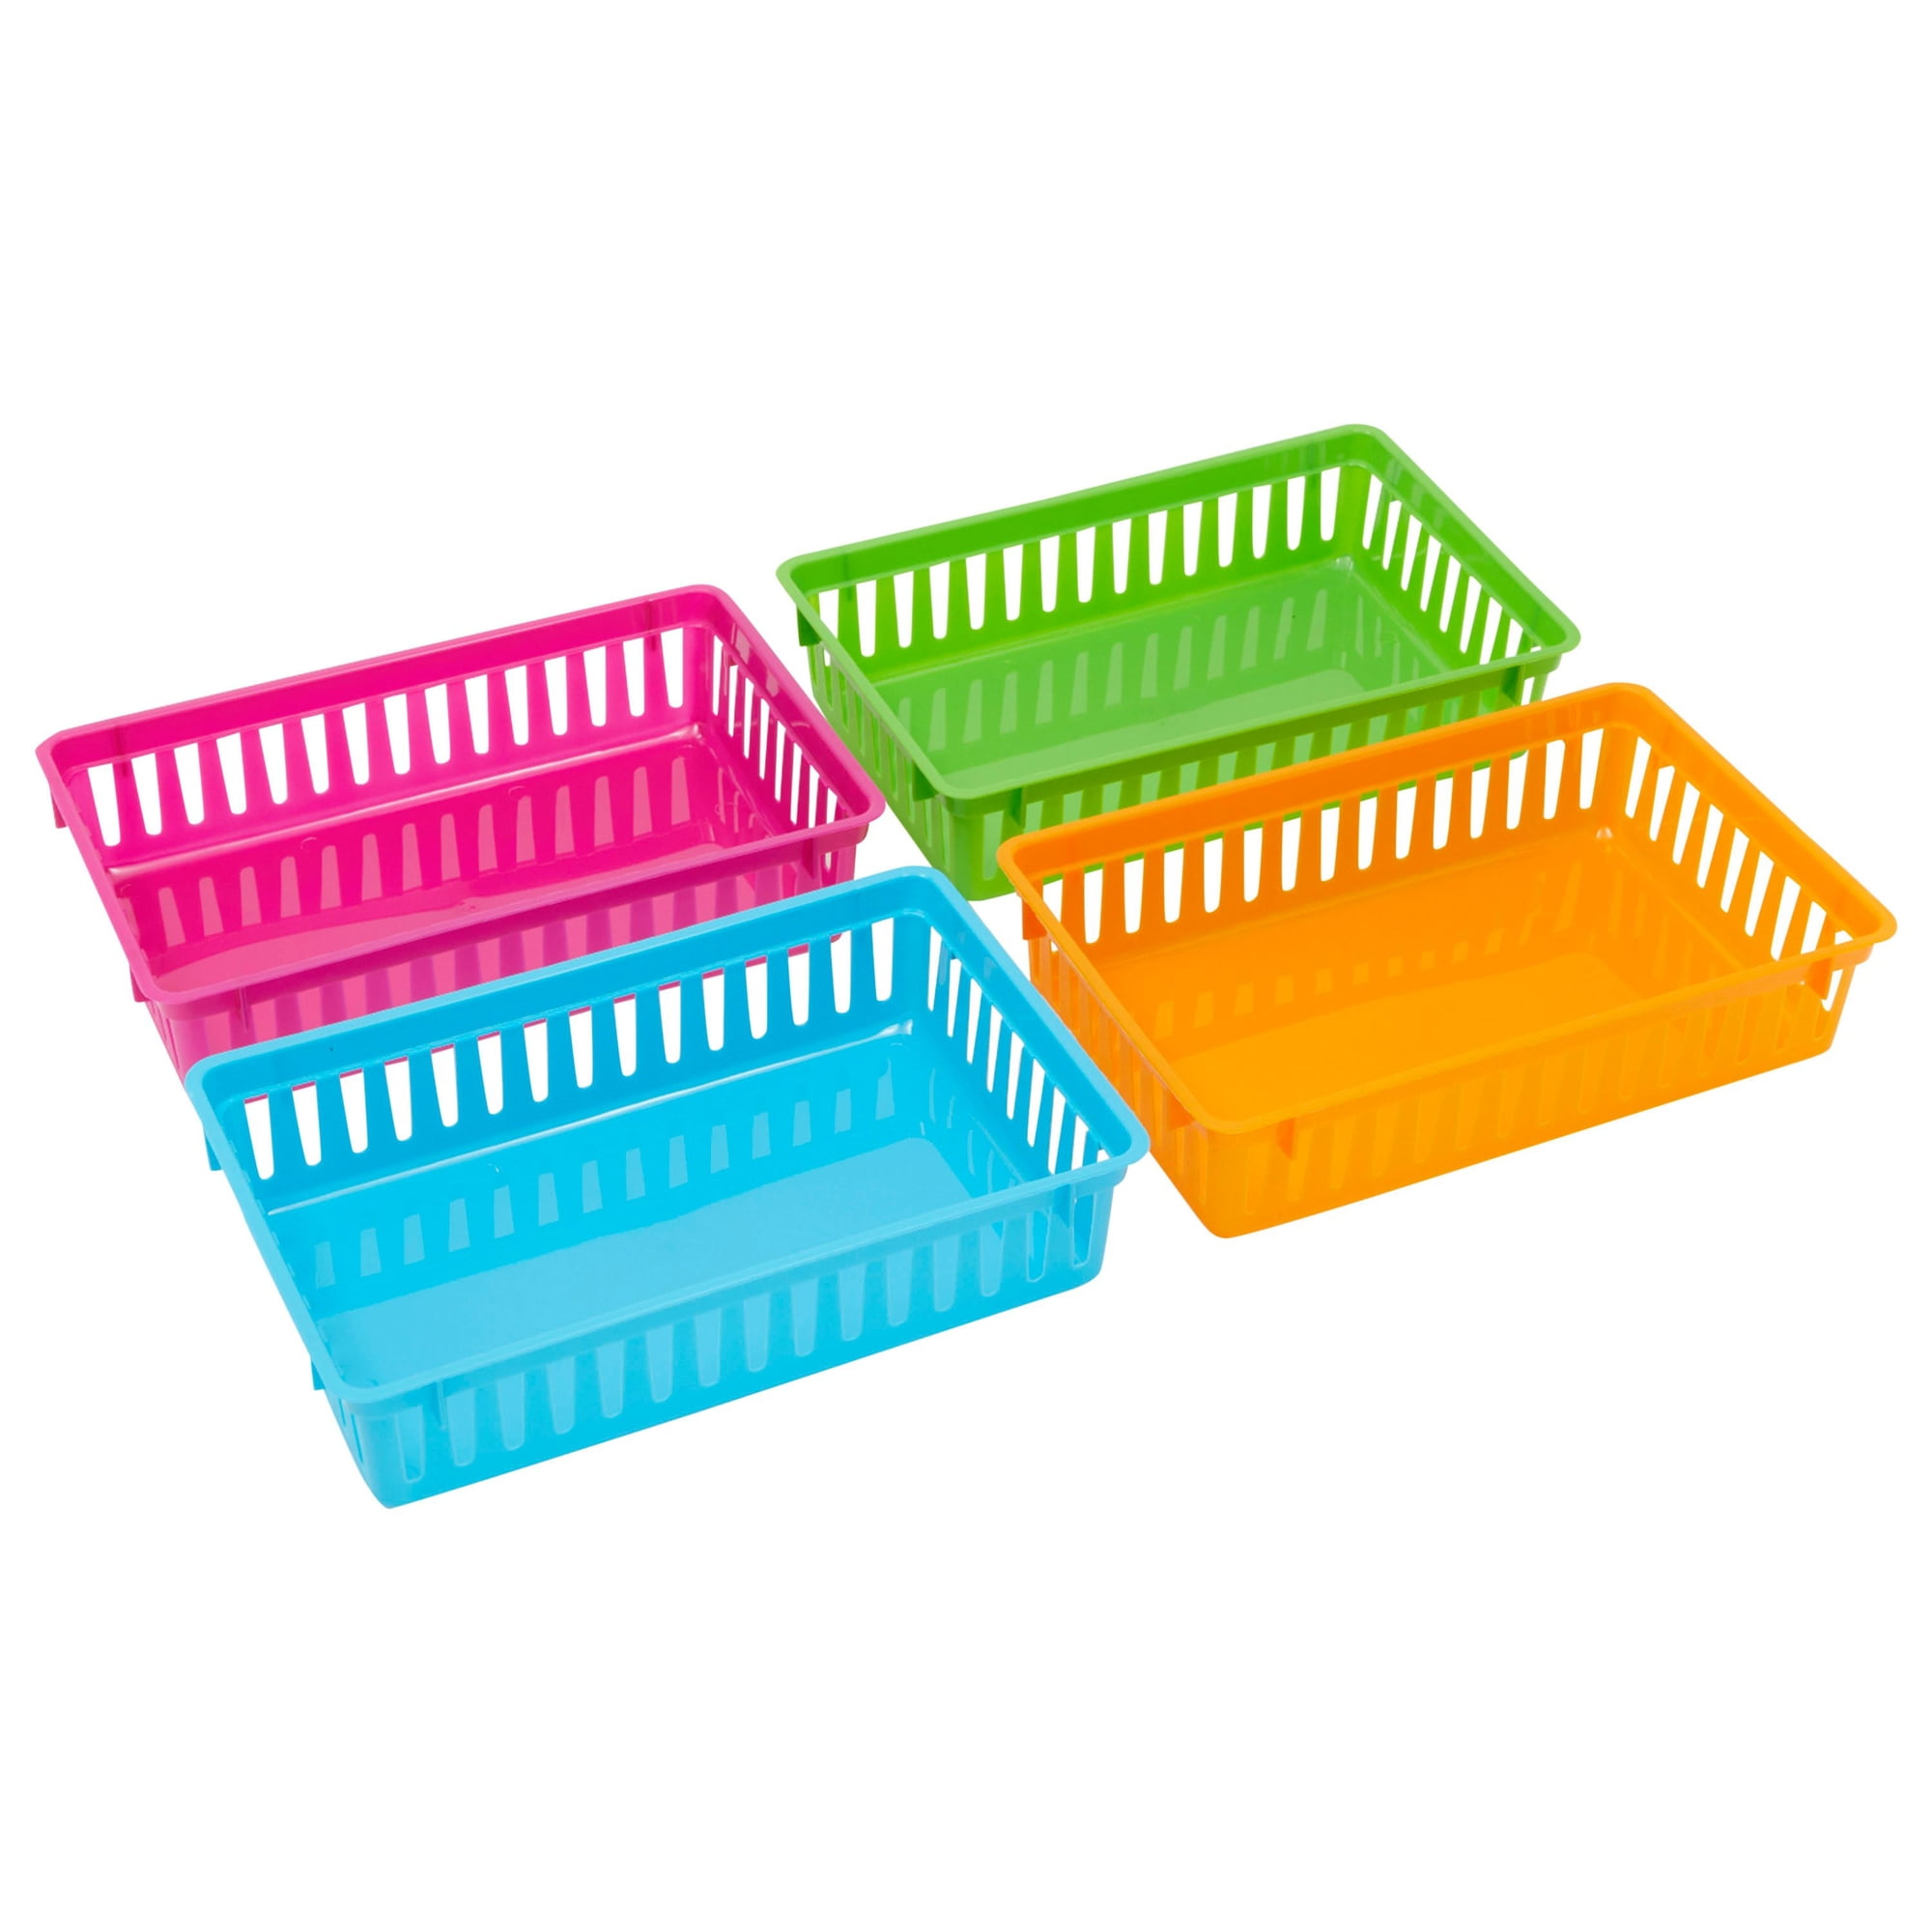 10 Pack Mini Storage Baskets Bins, Plastic Organizer Basket, Colorful Shelf  and Desk Make-up Storage Crate Organizing Containers, Ideal for Home